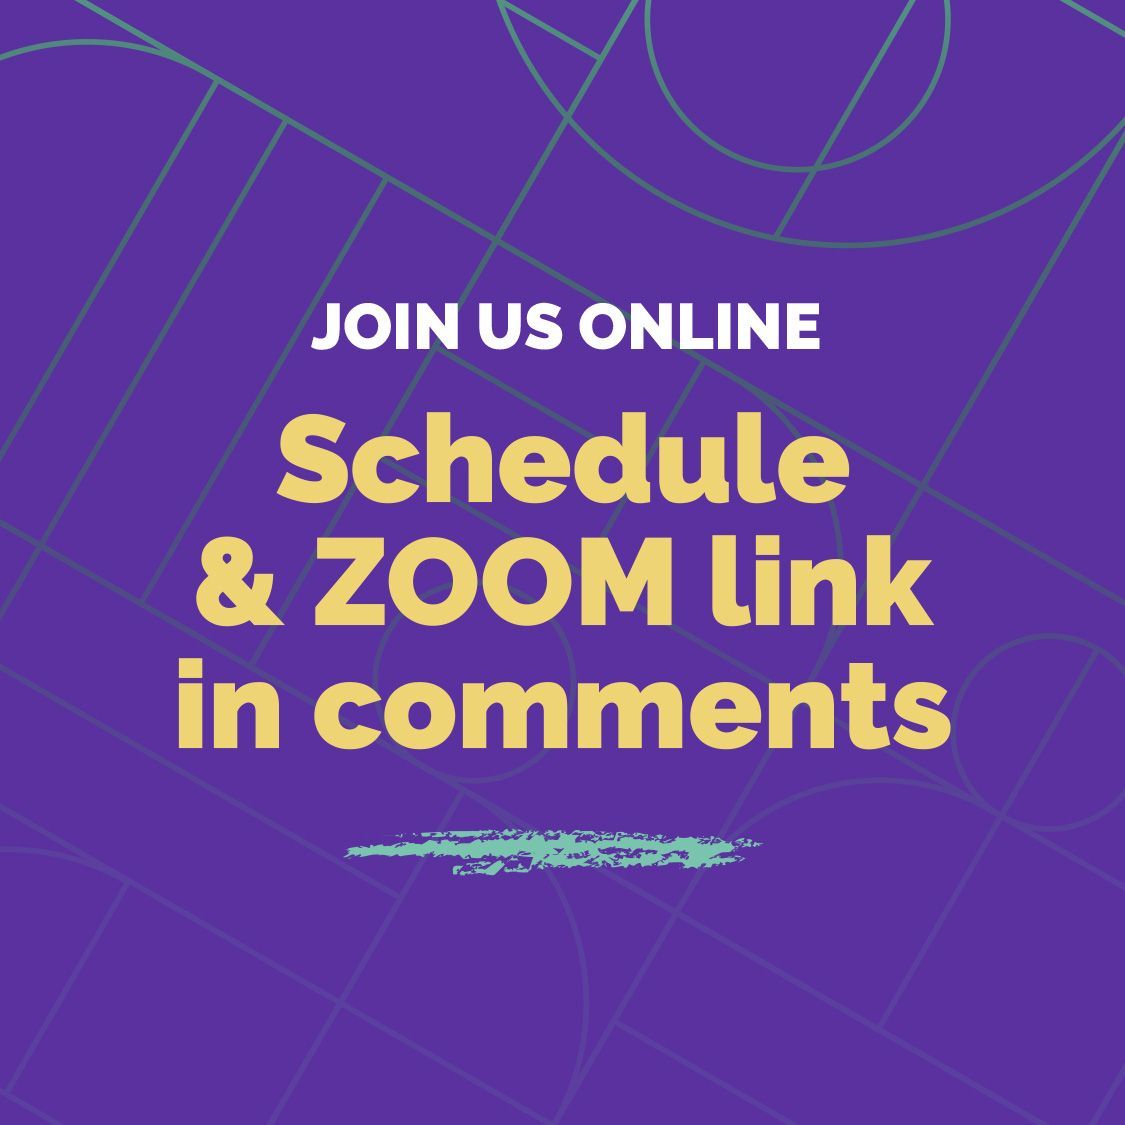 🧠 Exciting SDF ZOOM Meeting coming soon! 🌐 Join us for an insightful session on Critical Thinking & Self-Regulation. 📅 Date: 29th February at 11:00 AM - 2:00 PM 🔗 Zoom Link: buff.ly/3SNoxJ7 Meeting ID: 812 3292 2736 Passcode: 255968